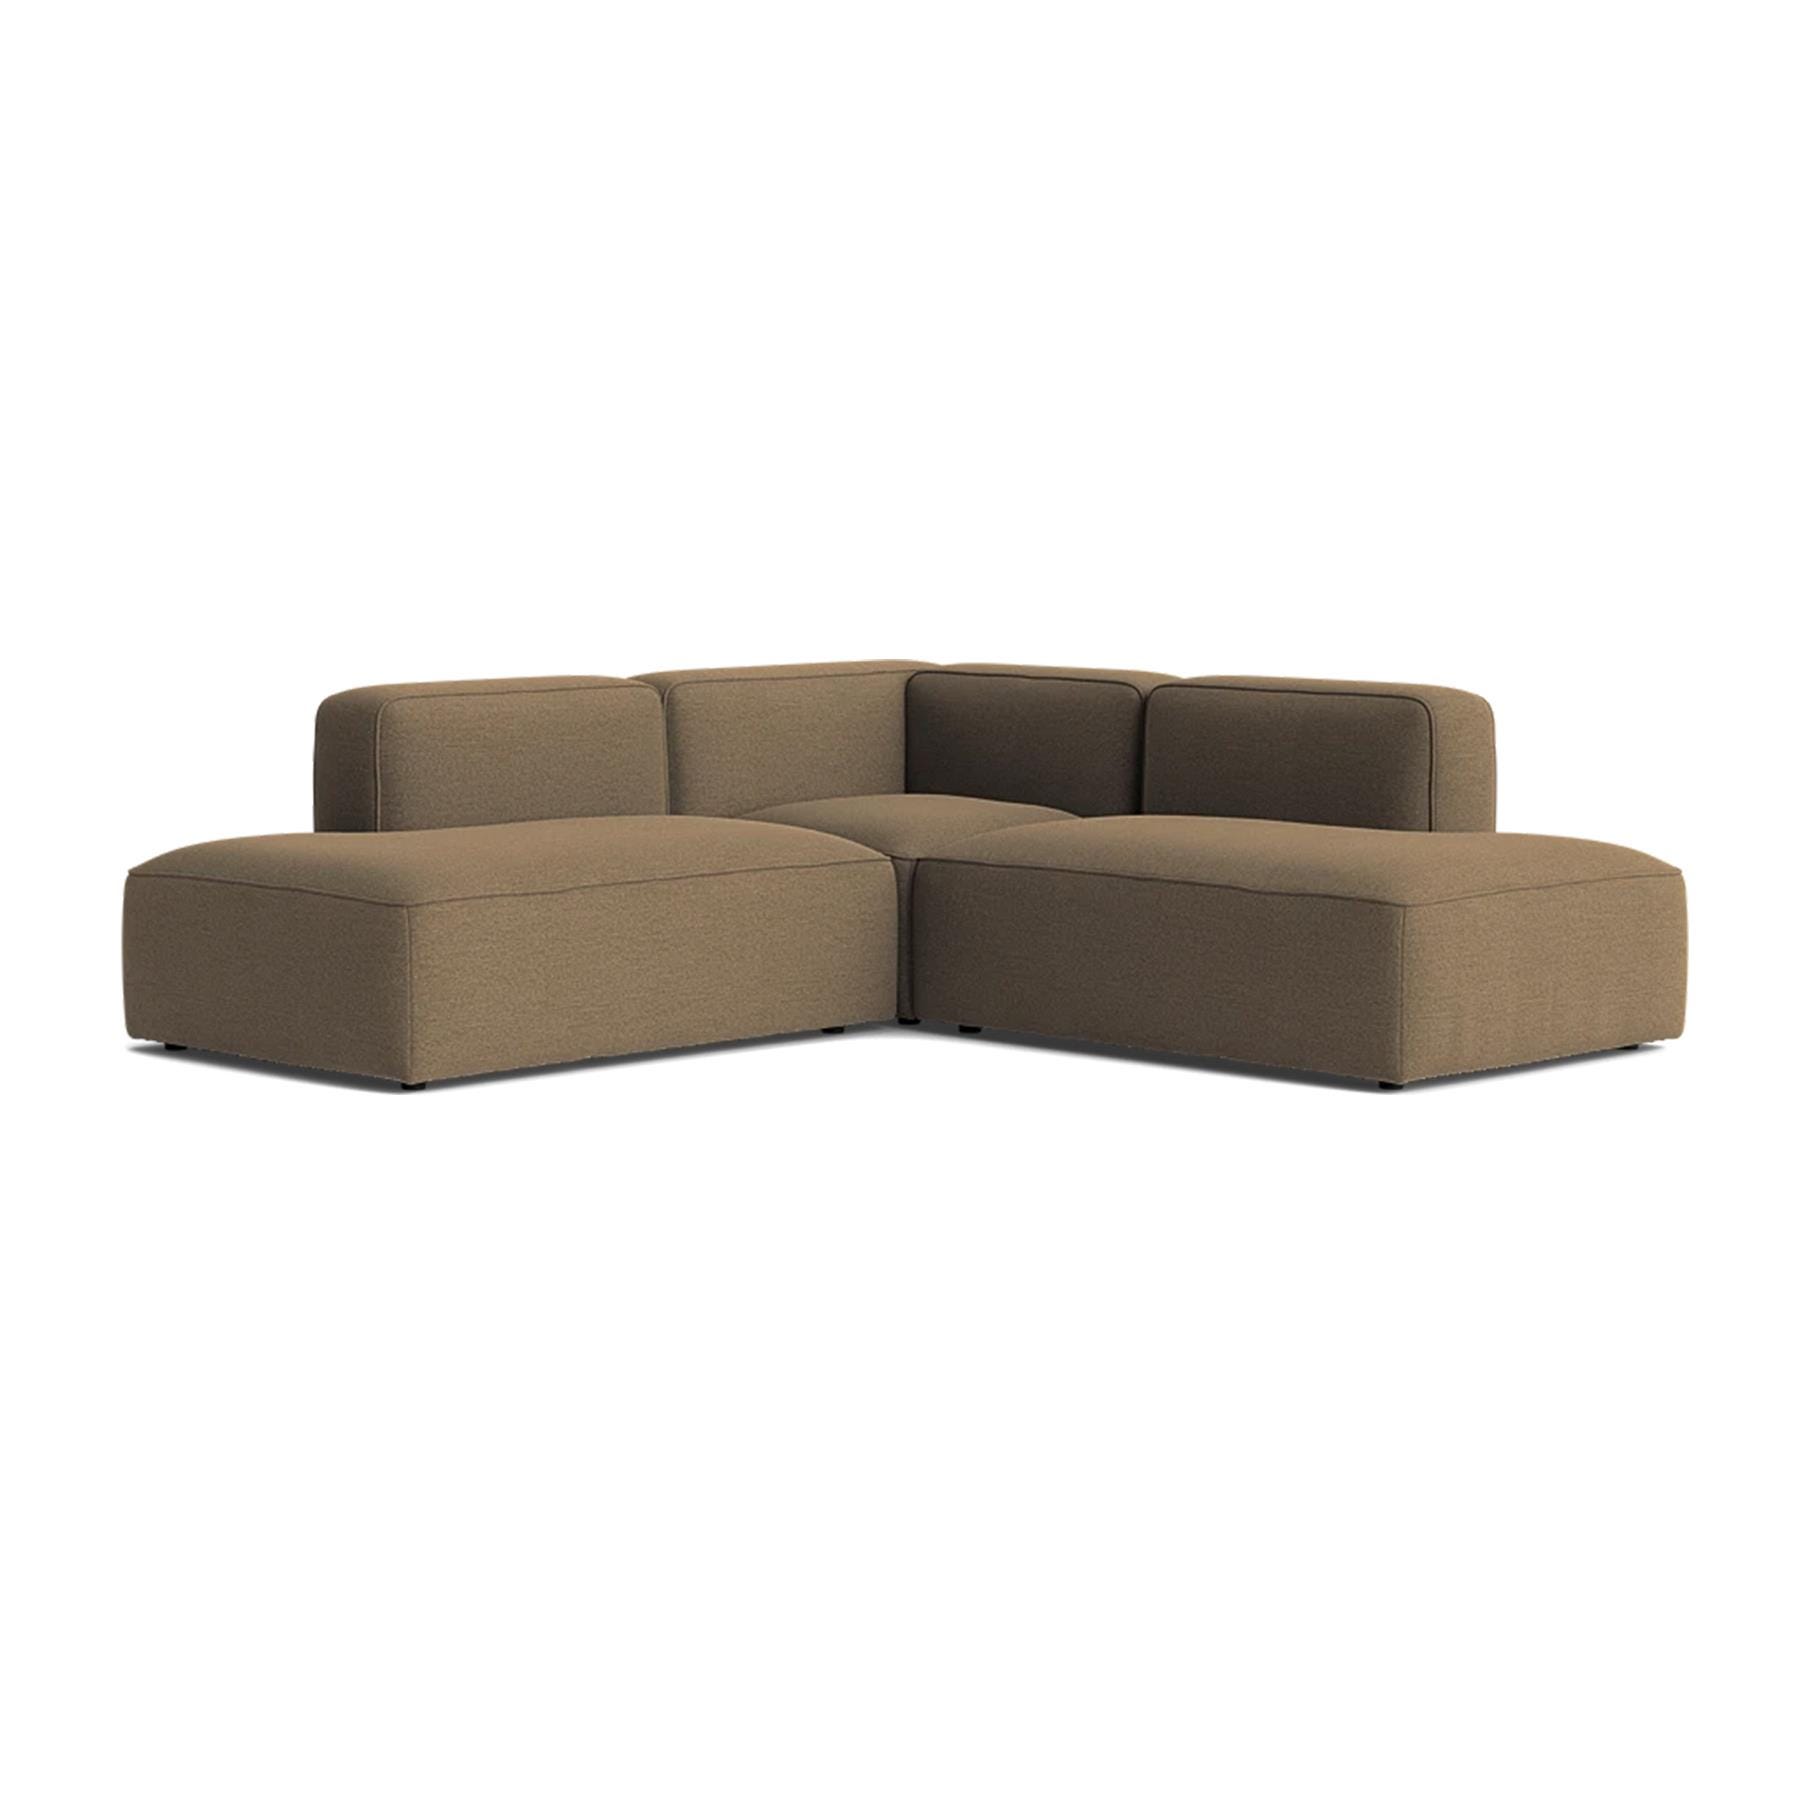 Make Nordic Basecamp Corner Sofa With Open Ends Rewool 358 Brown Designer Furniture From Holloways Of Ludlow